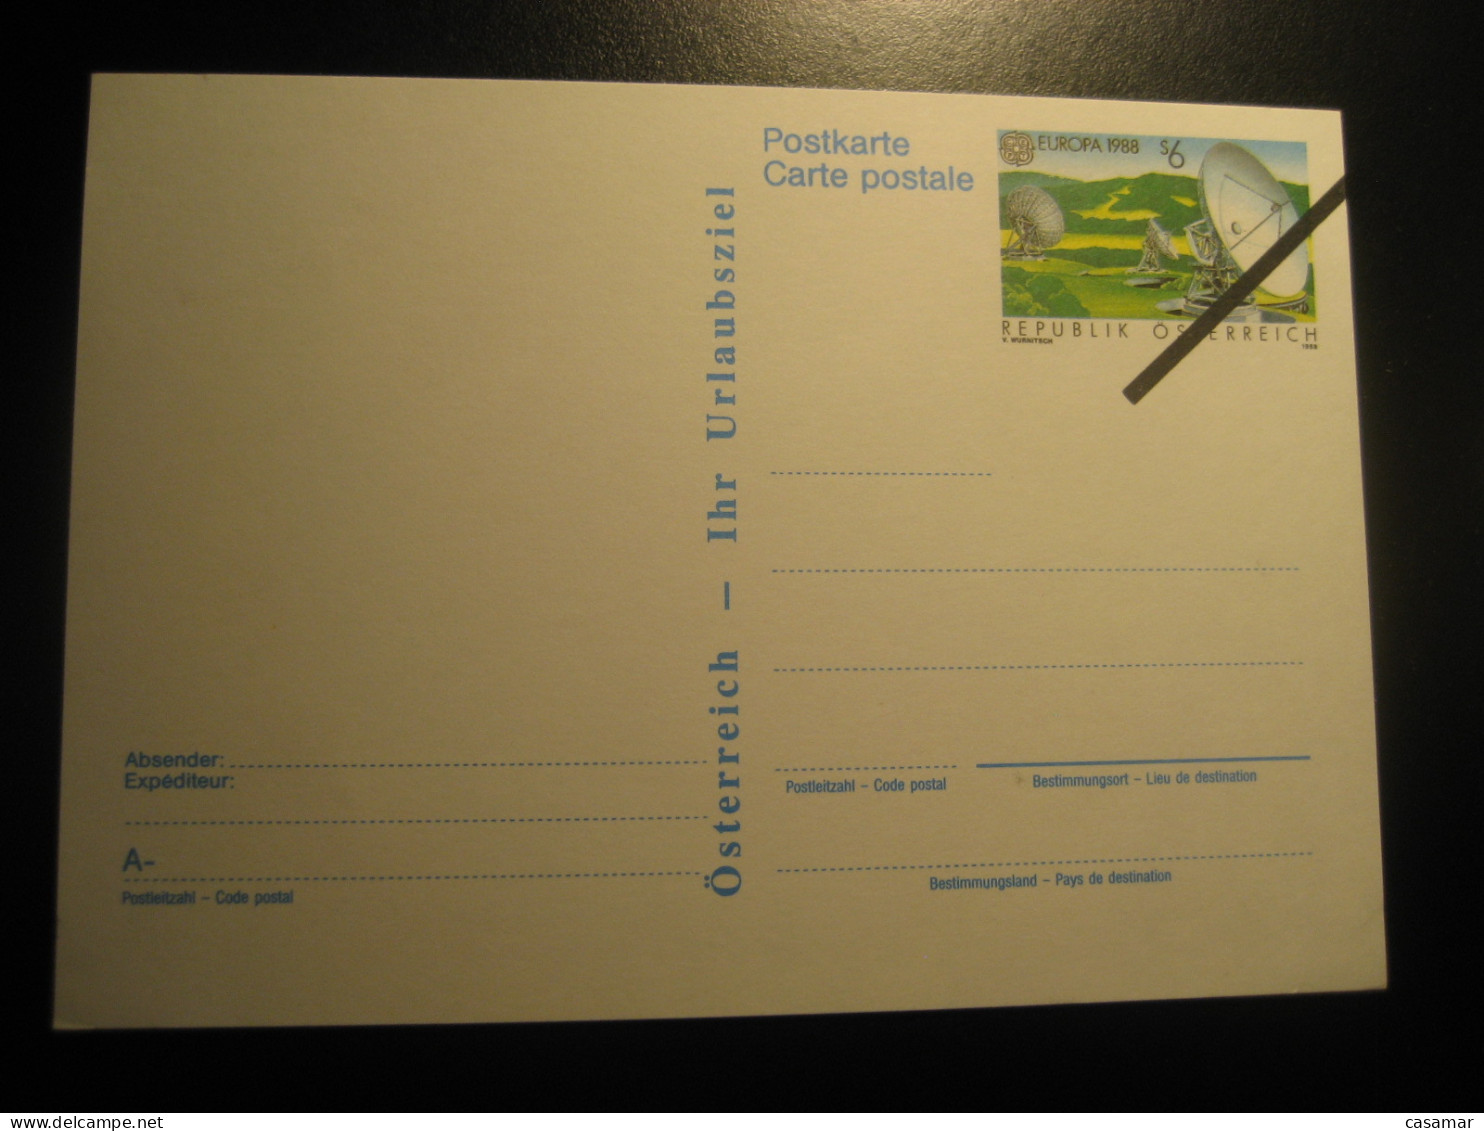 1988 Europa Osterreich Your Holiday Destination SPECIMEN Postal Stationery Card Overprinted AUSTRIA - Proofs & Reprints